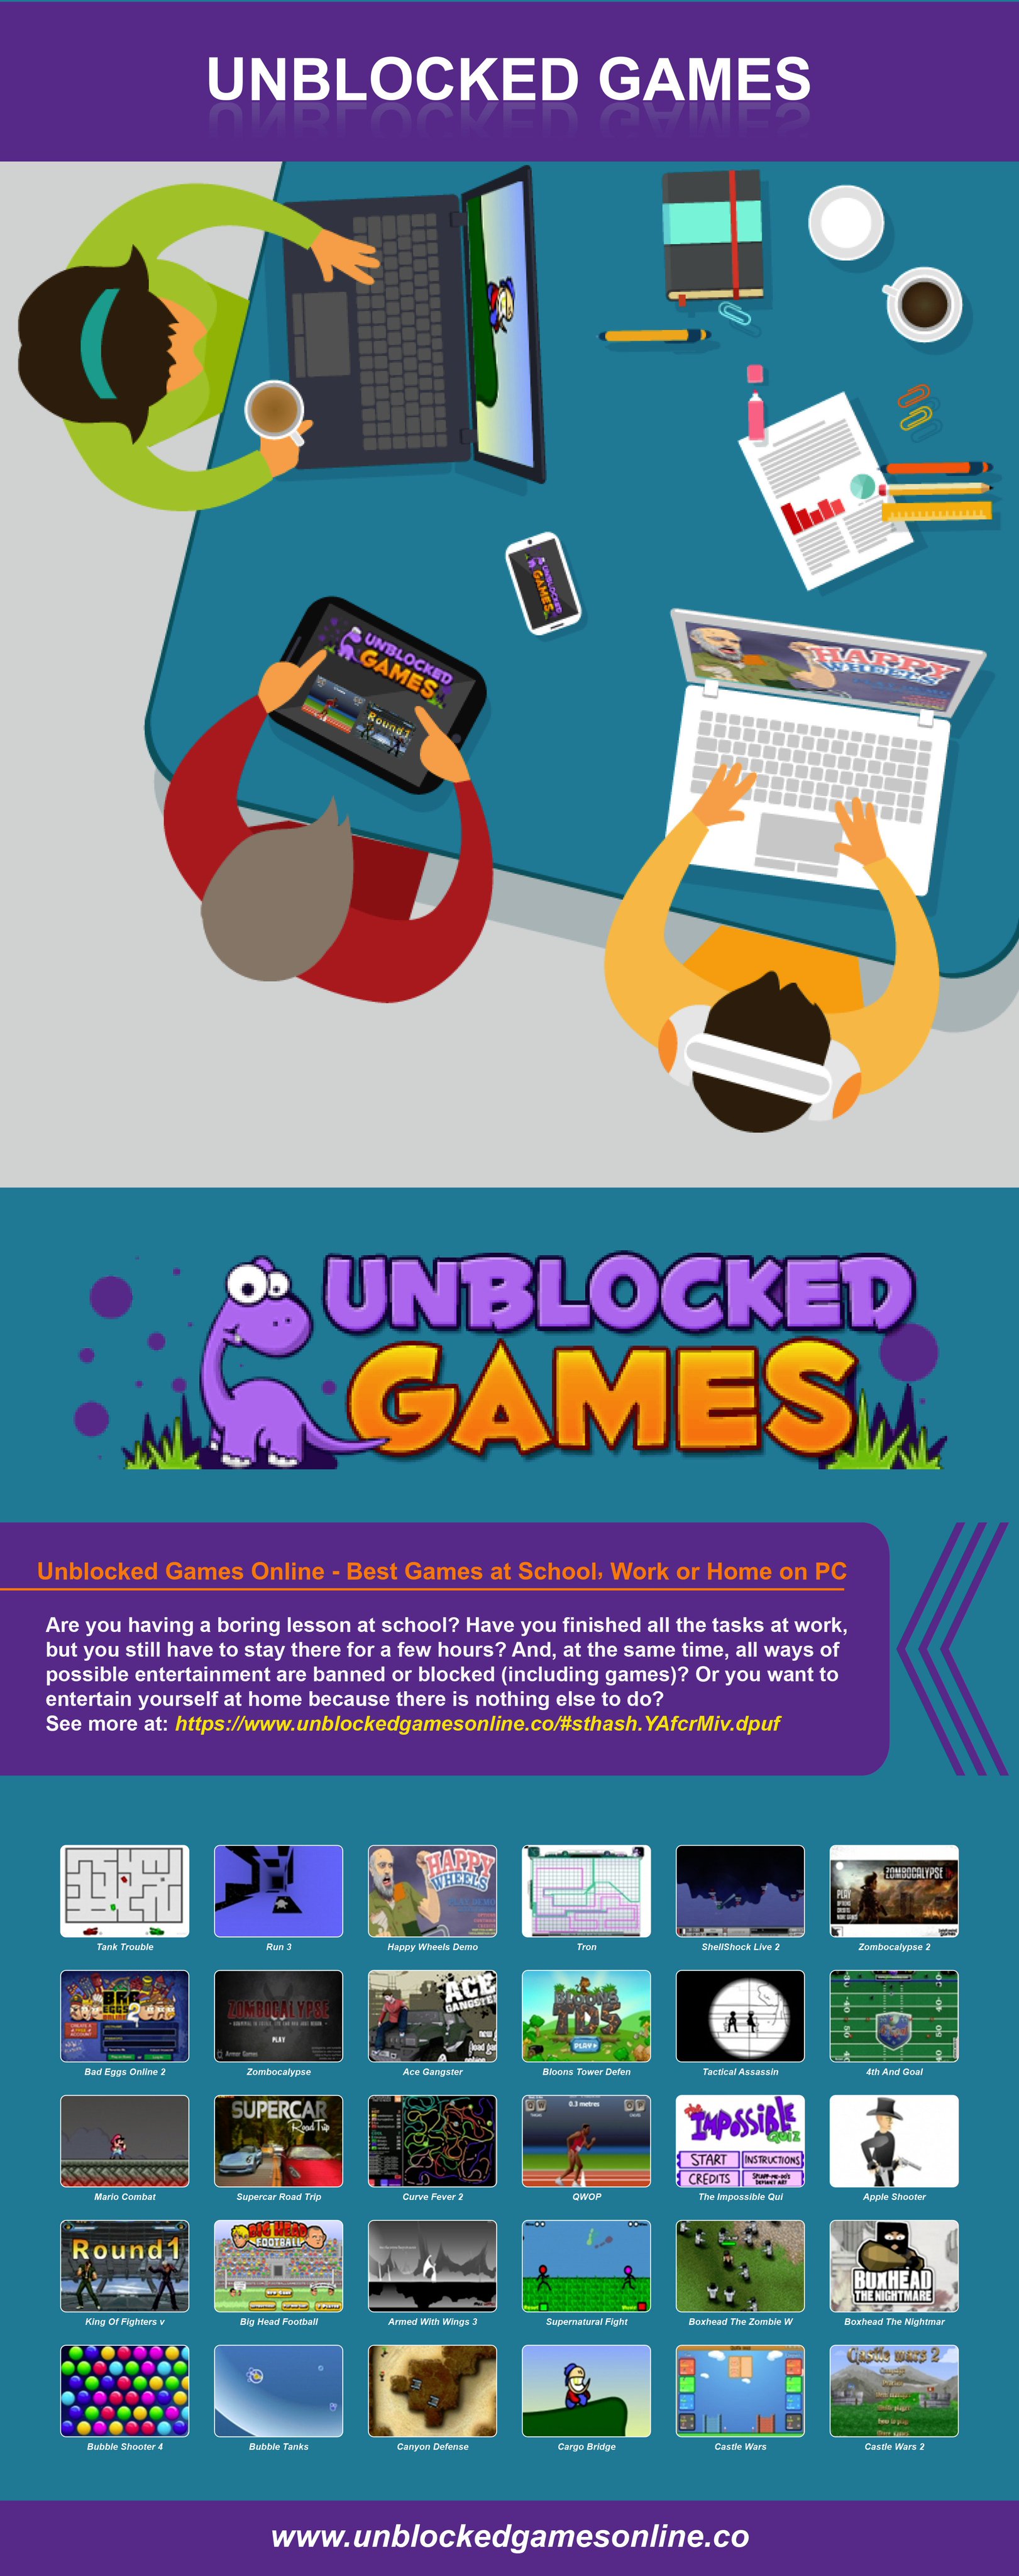 How to Unblock Online Games at School